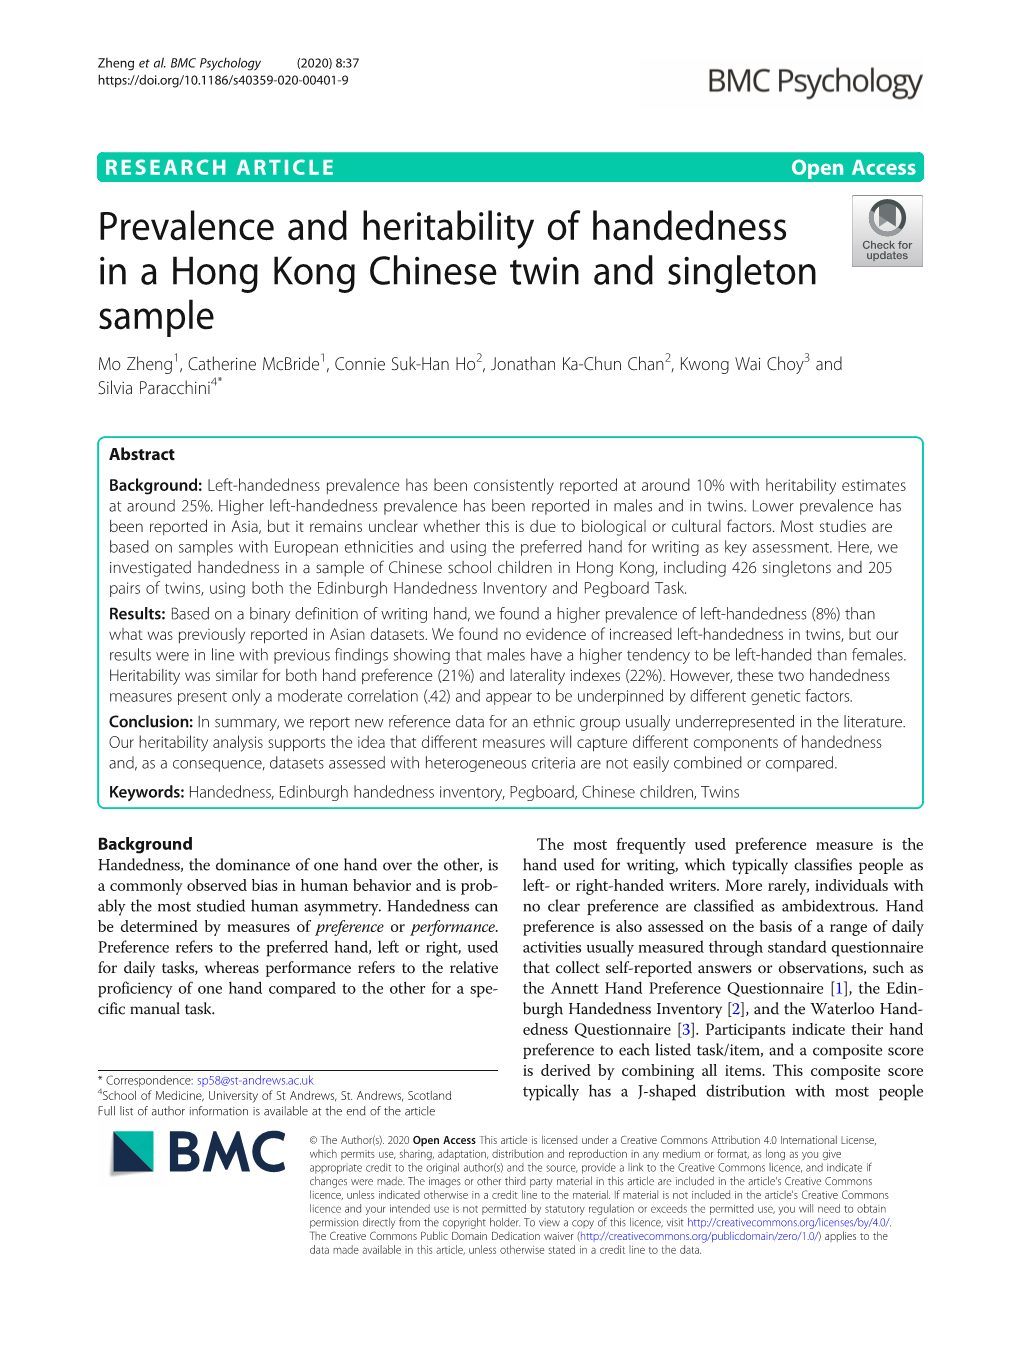 Prevalence and Heritability of Handedness in a Hong Kong